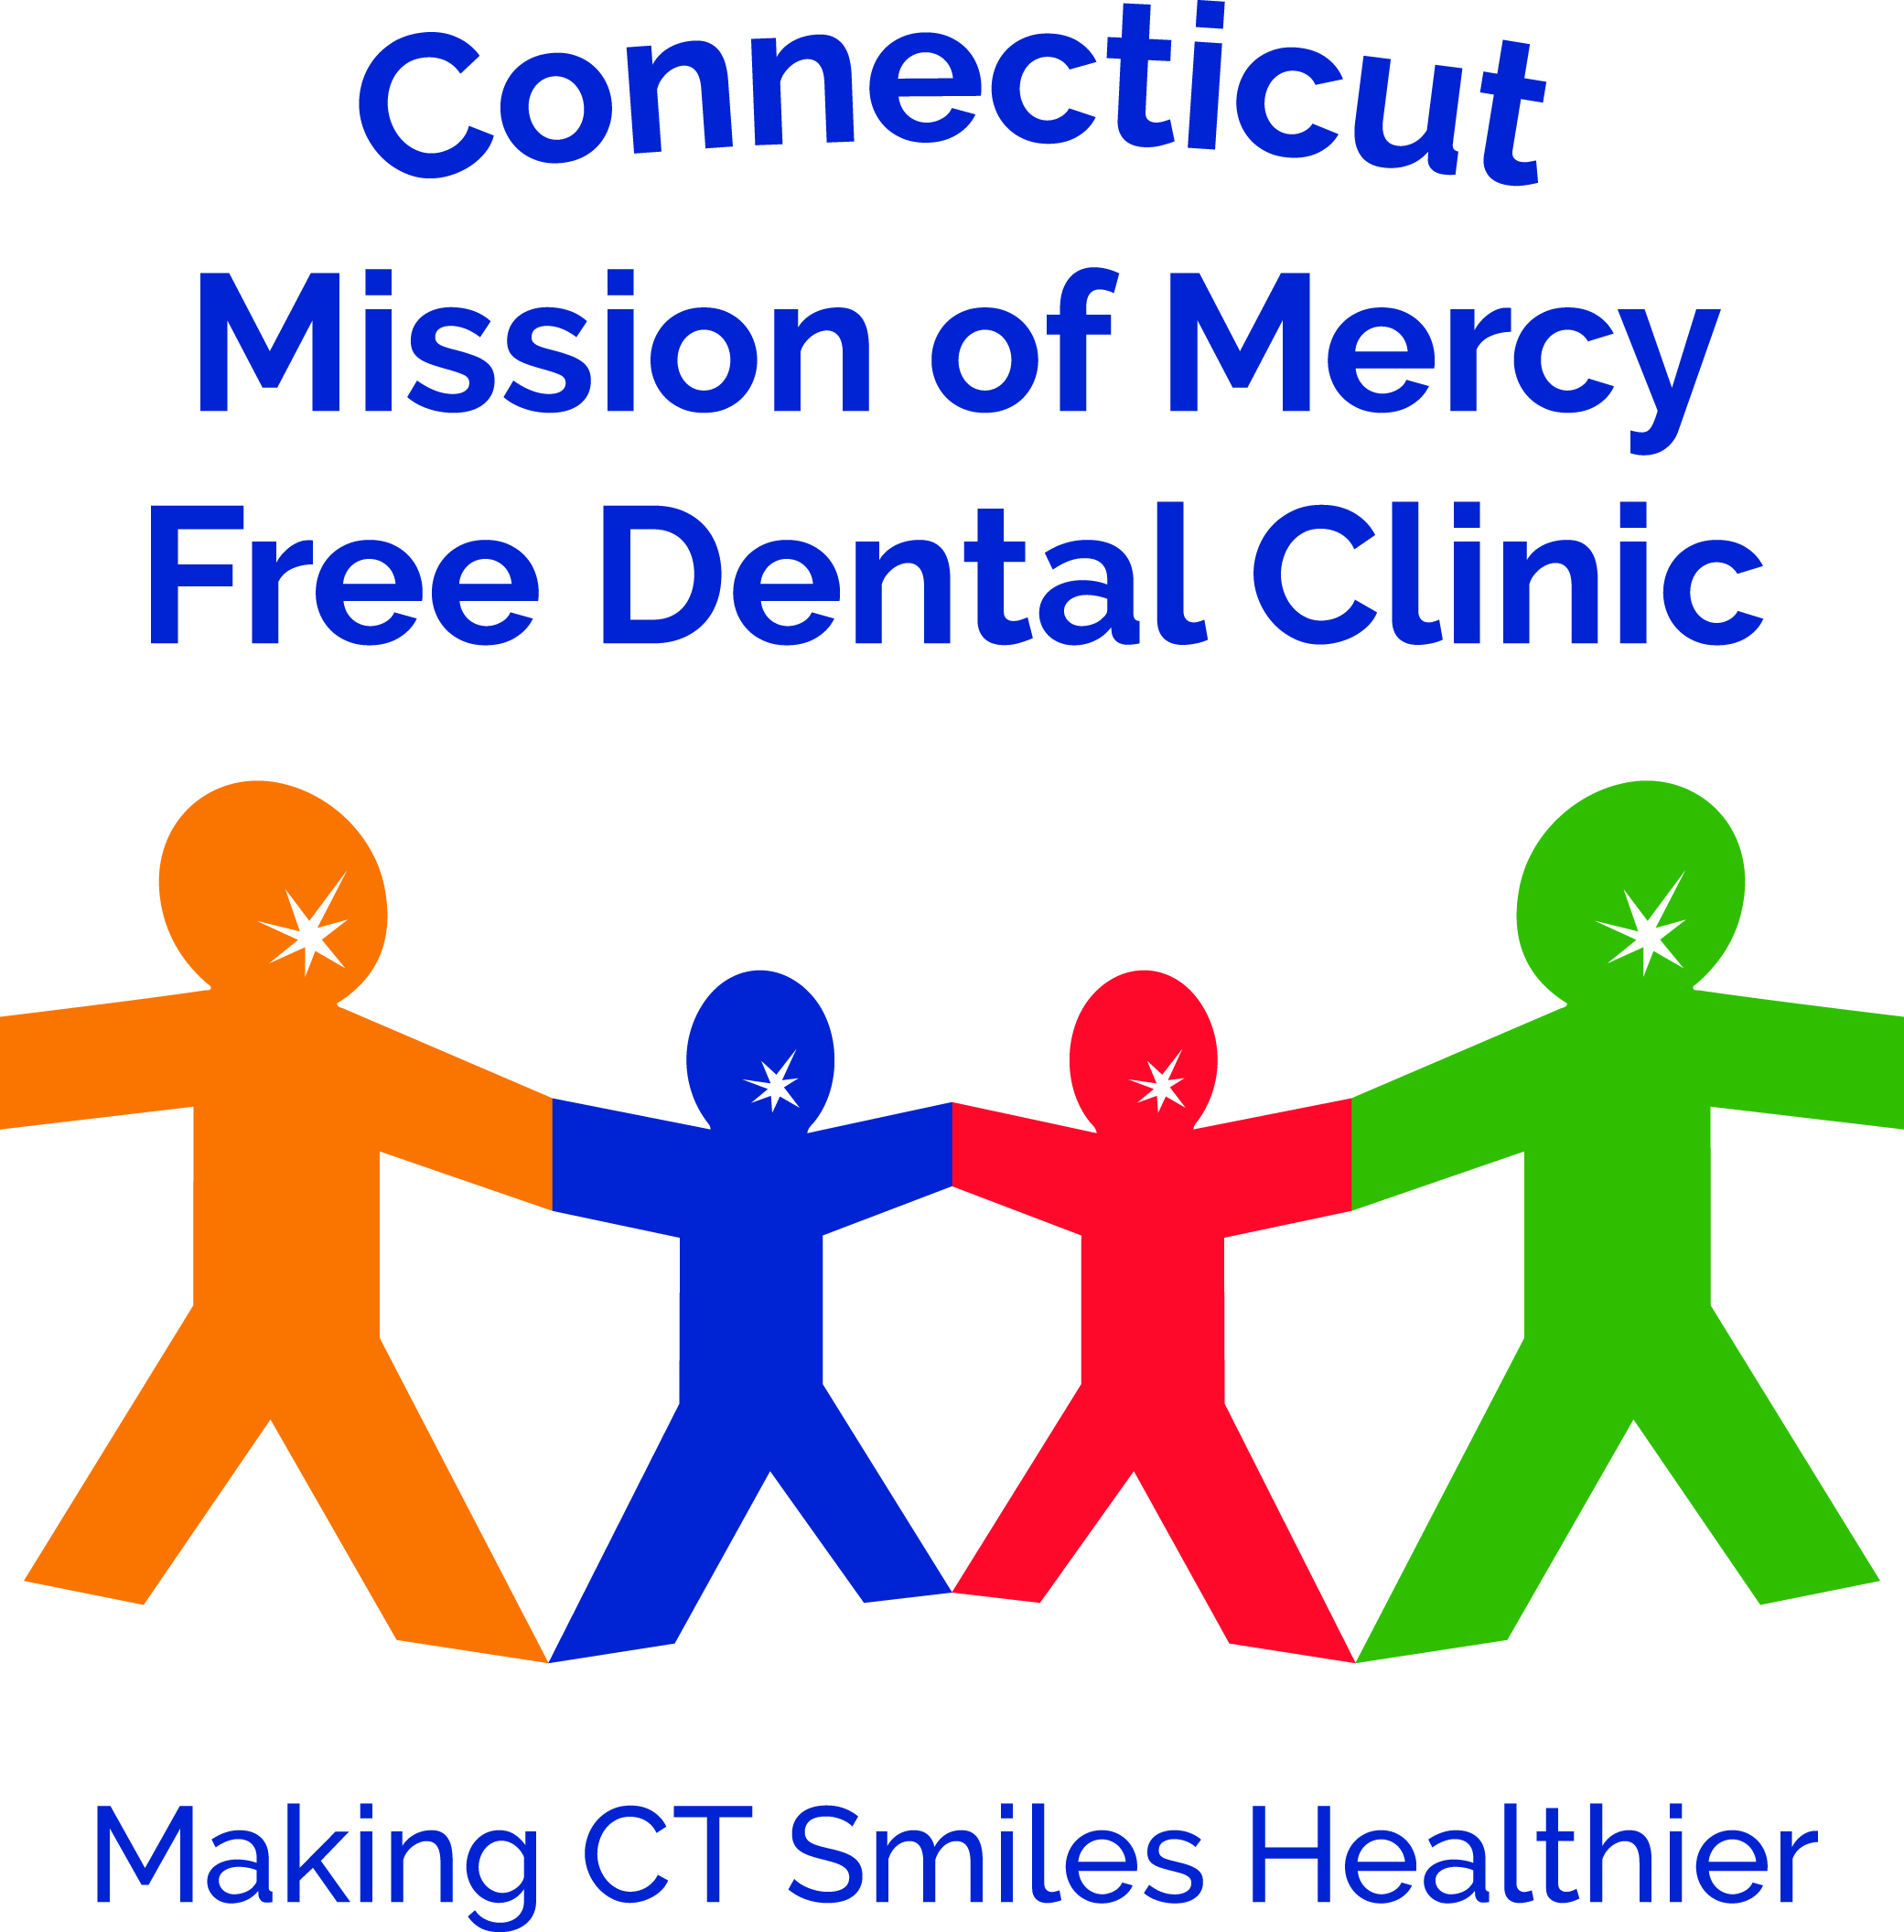 Hartford Courant Mission of Mercy free dental clinic coming to UConn